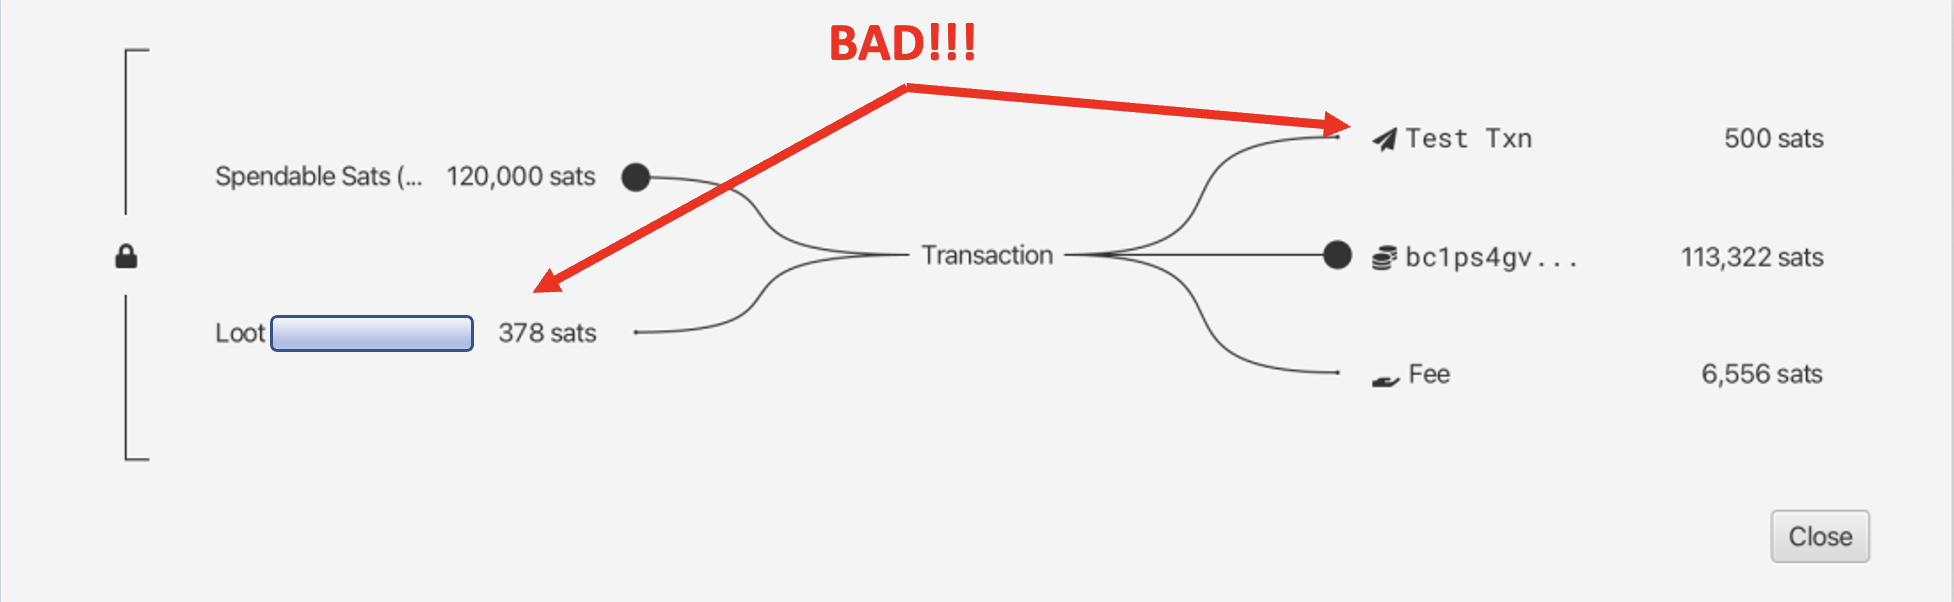 A sat-by-sat breakdown of what is going to happen in this transaction.